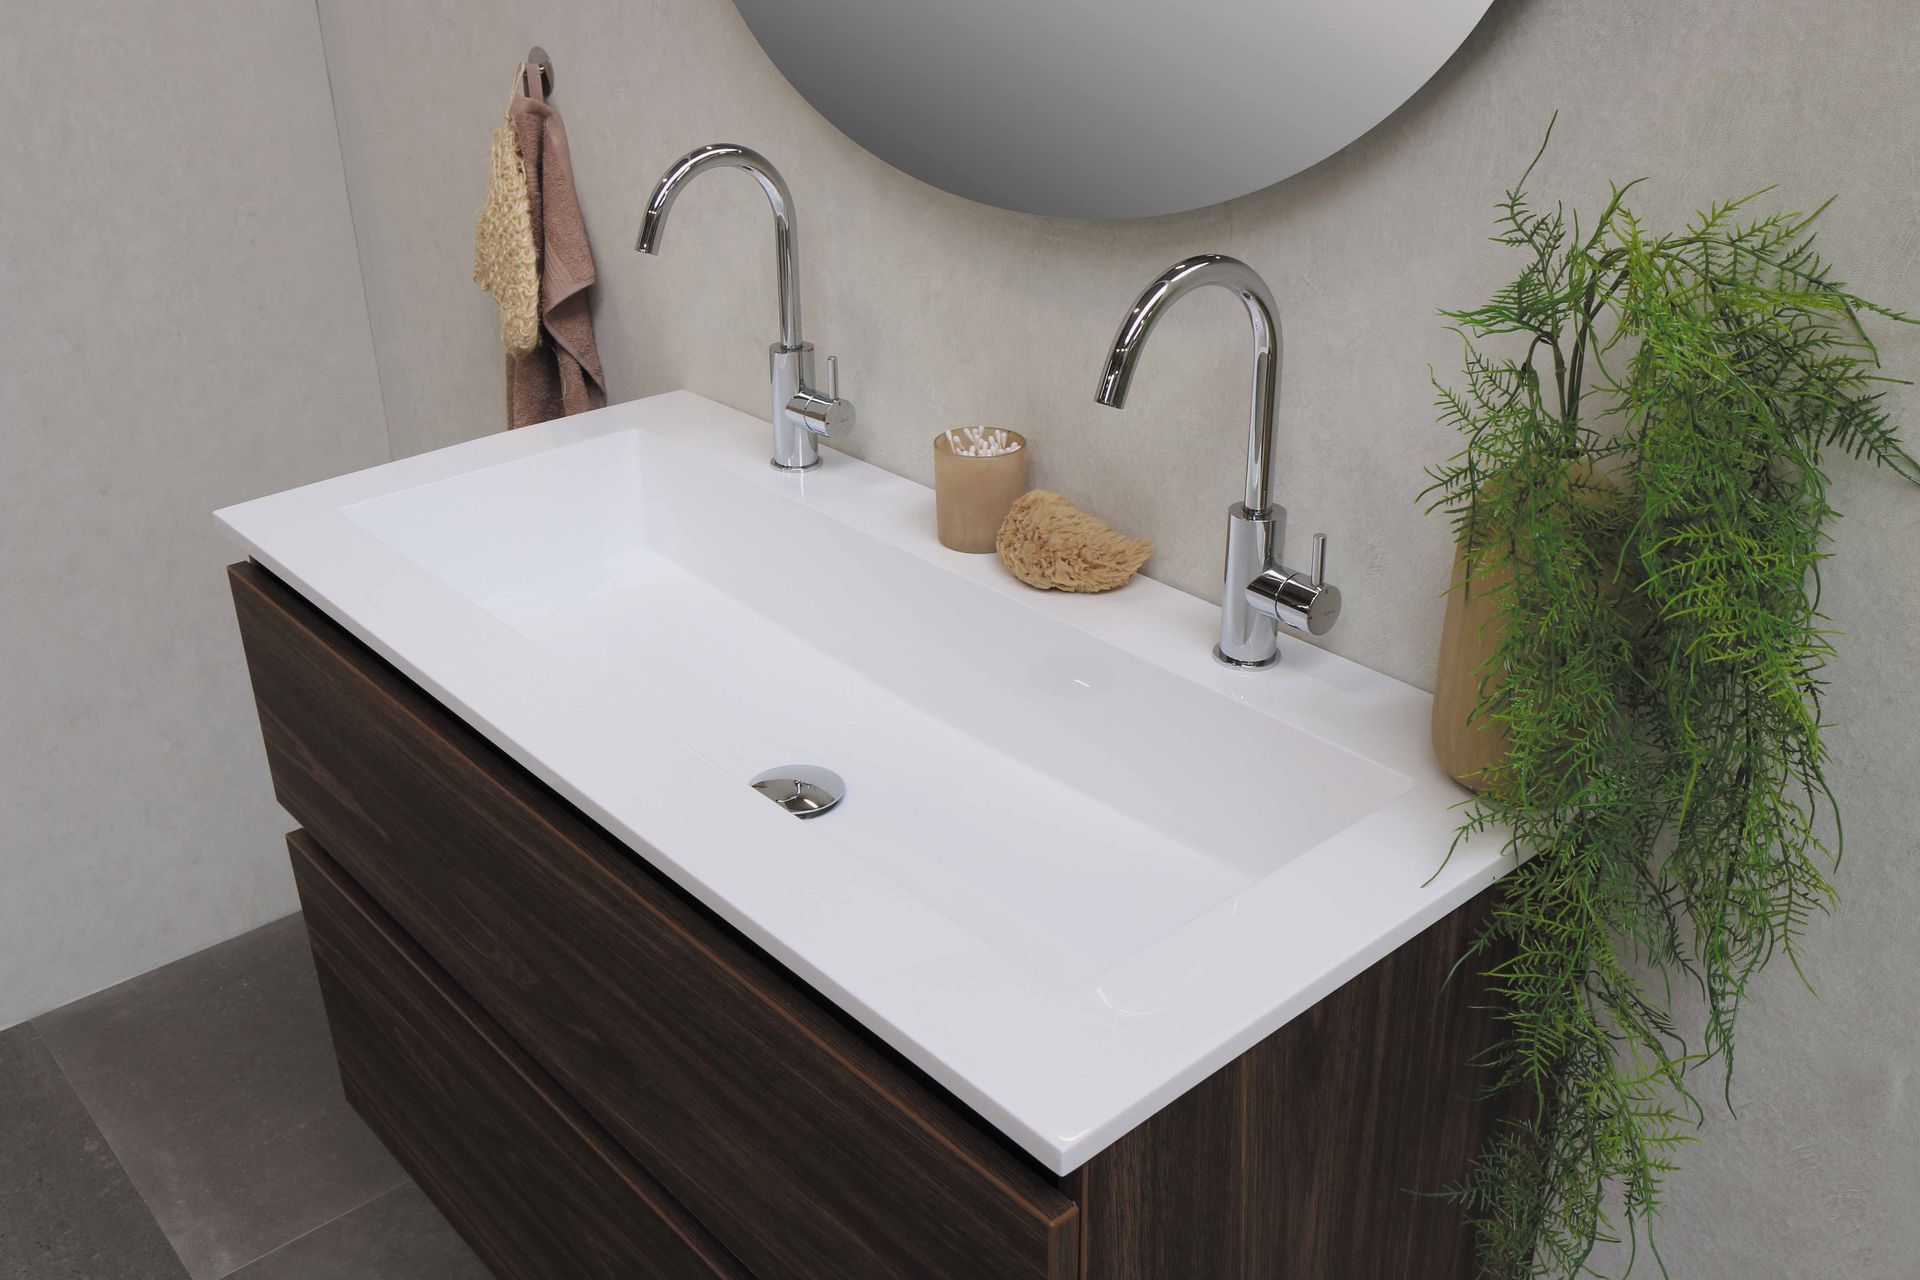 White ceramic sink with two stainless steel faucets installed.